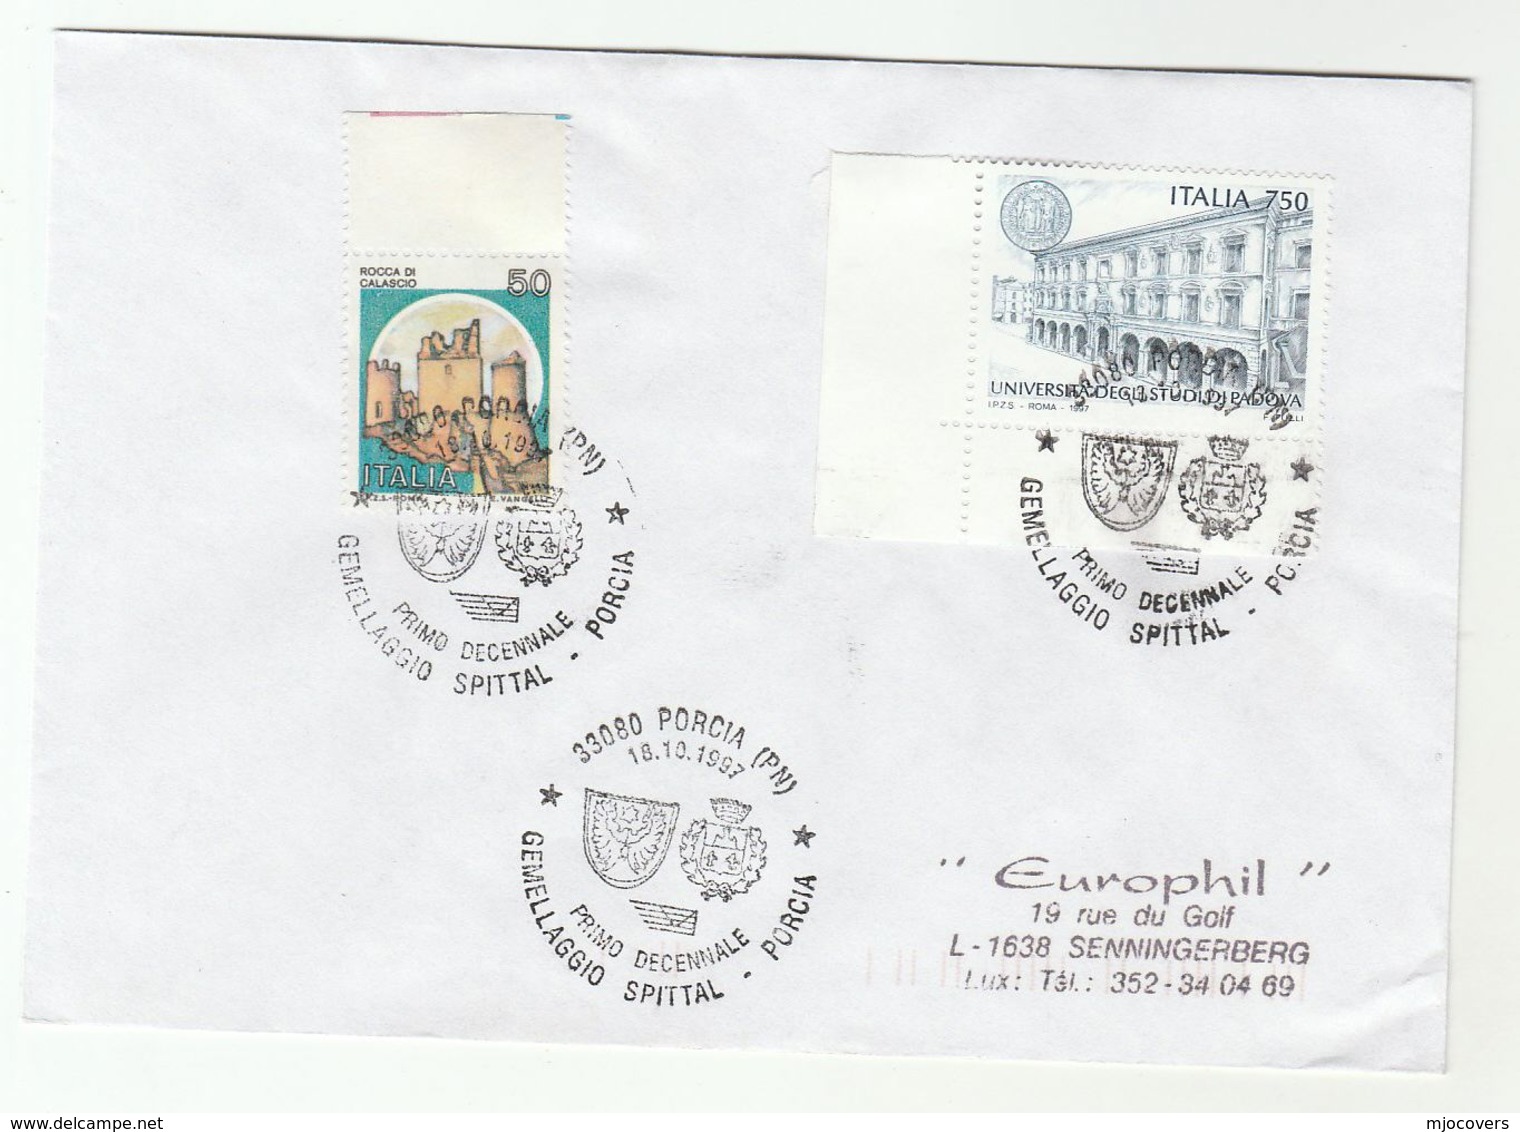 1997 TWINNING - PORCIA & SPITTAL  EVENT COVER  Porcia Heraldic ITALY Stamps University - 1991-00: Storia Postale